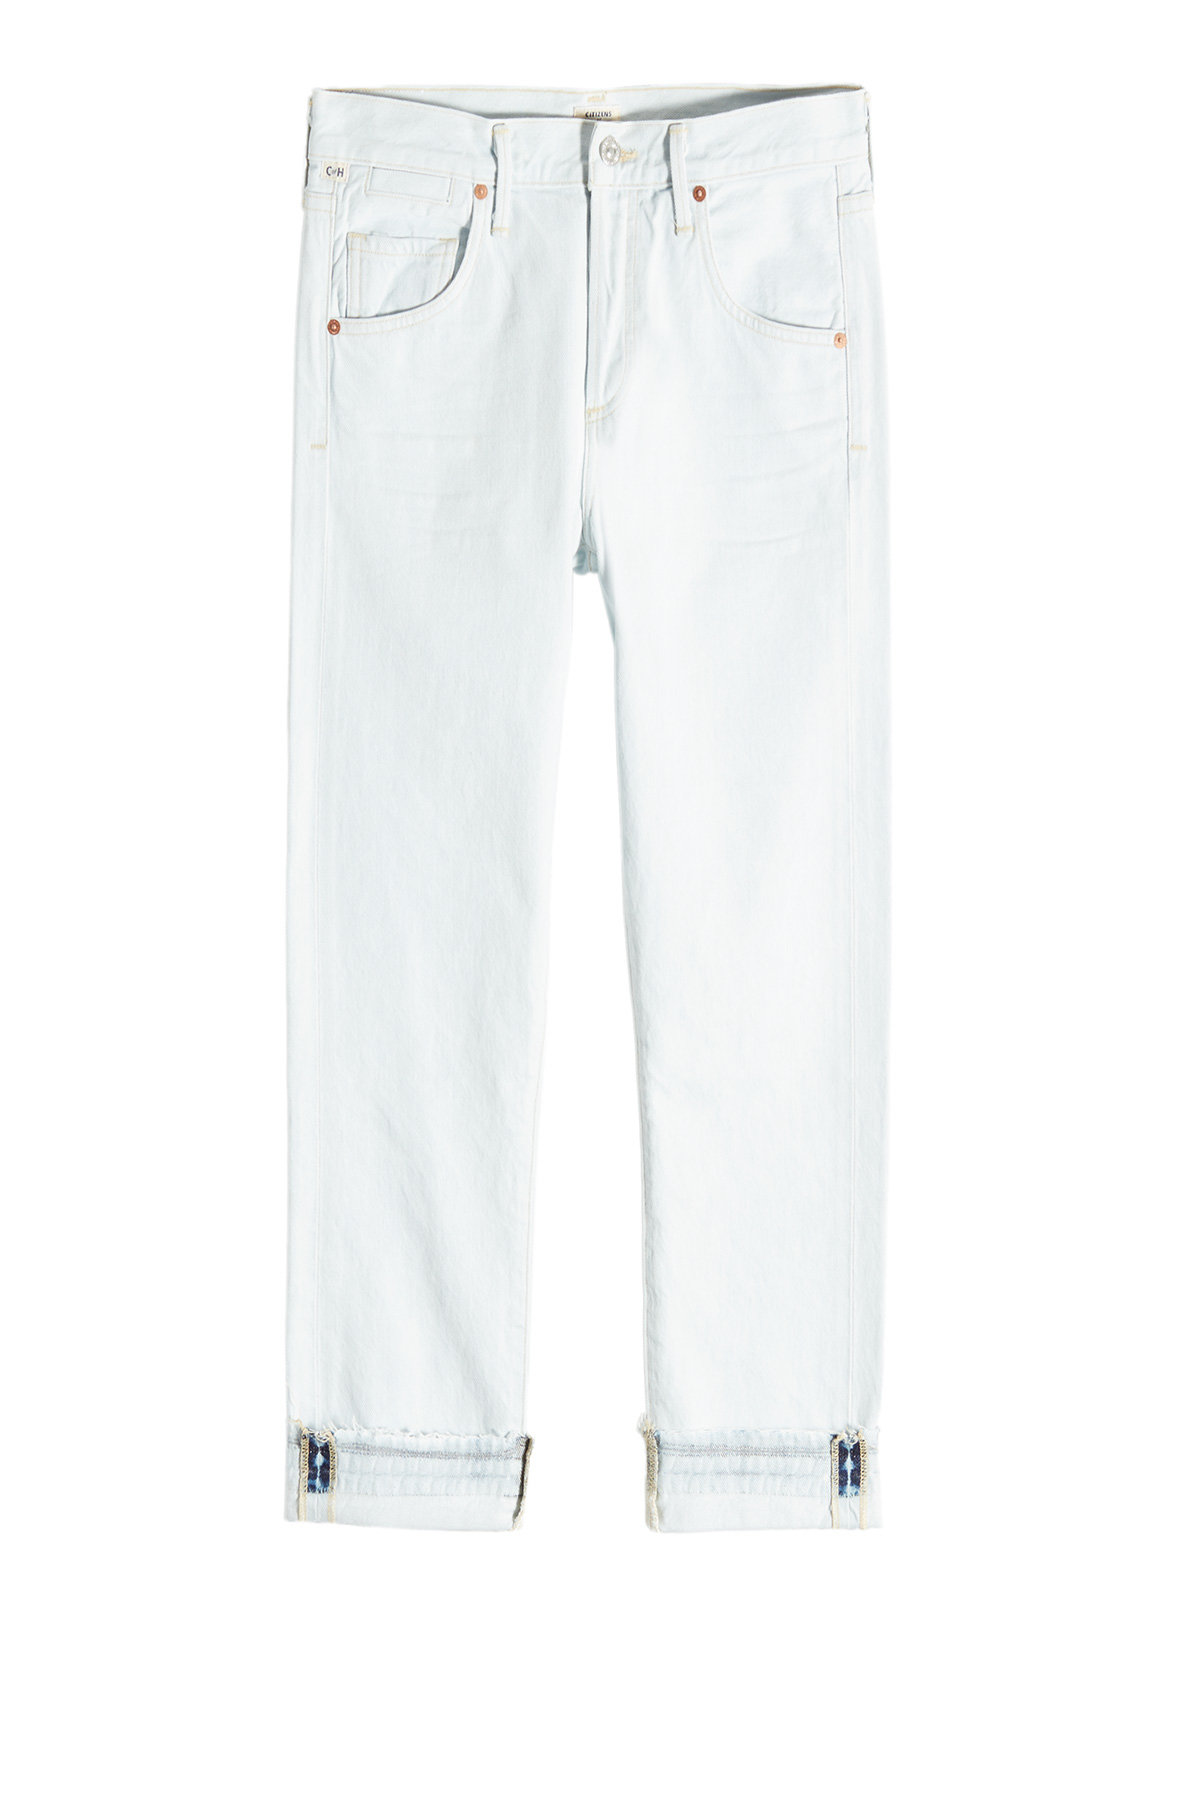 Citizens of Humanity - Emerson Cropped Slim Boyfriend Jeans